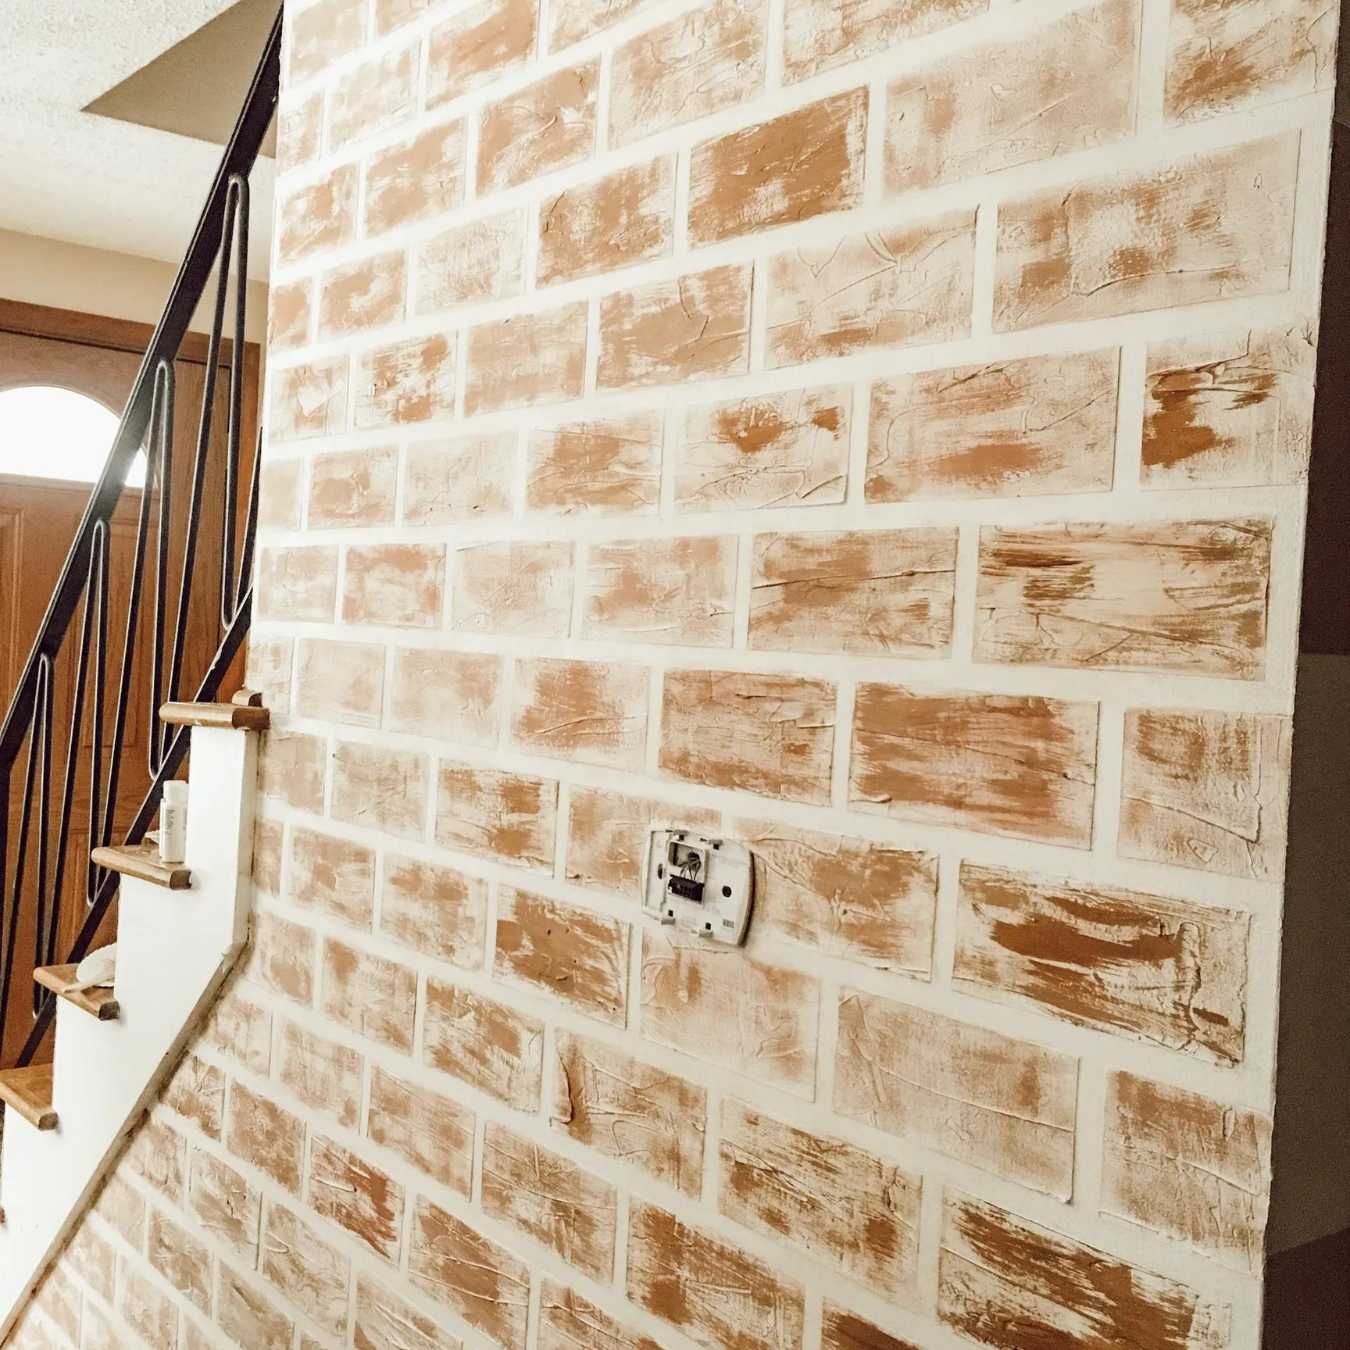 How To Paint A Fake Brick Wall